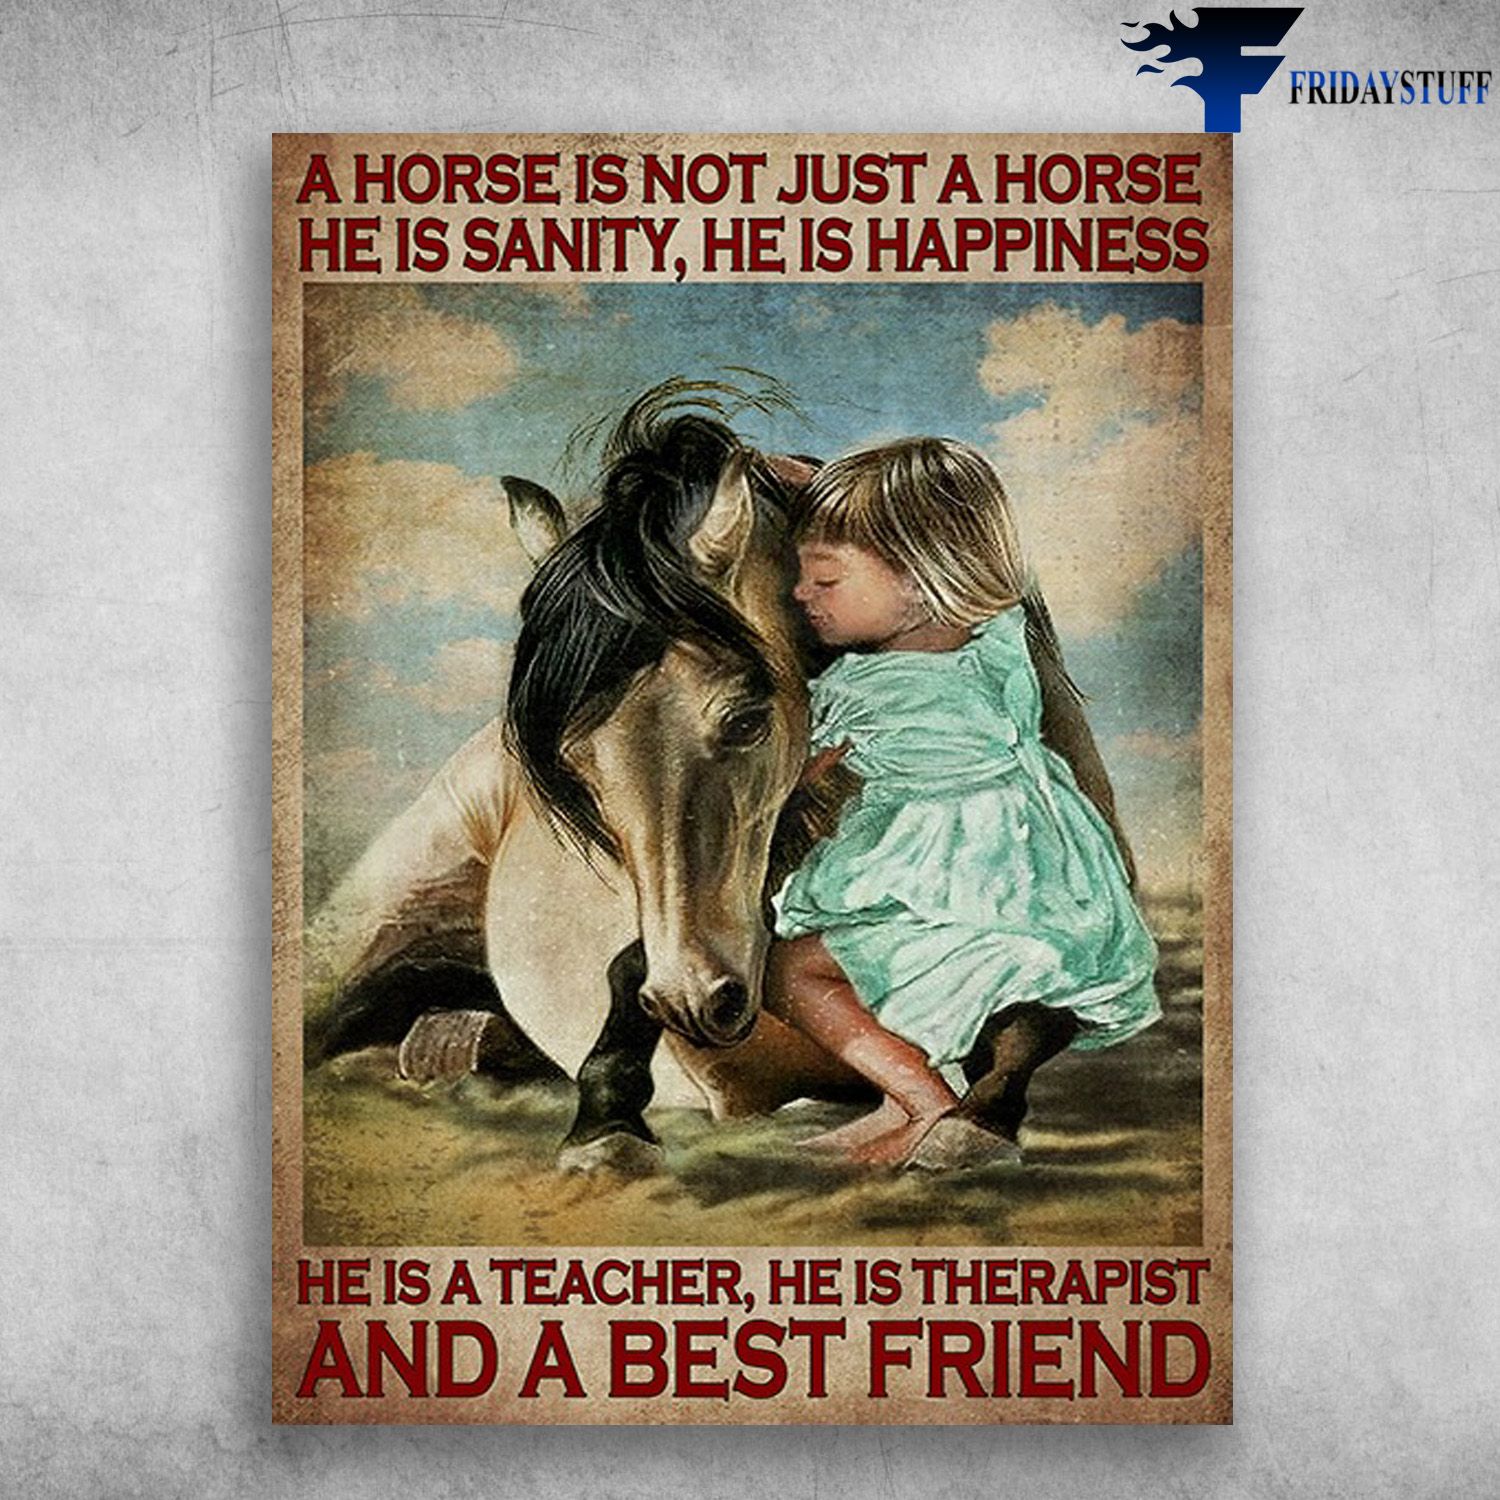 Little Girl And Horse, Horse Is Friend - A Horse Is Not Just A Horse, He Is Sanity, He Is Happiness, He Is A Teacher, He Is Therapist, And A Best Friend